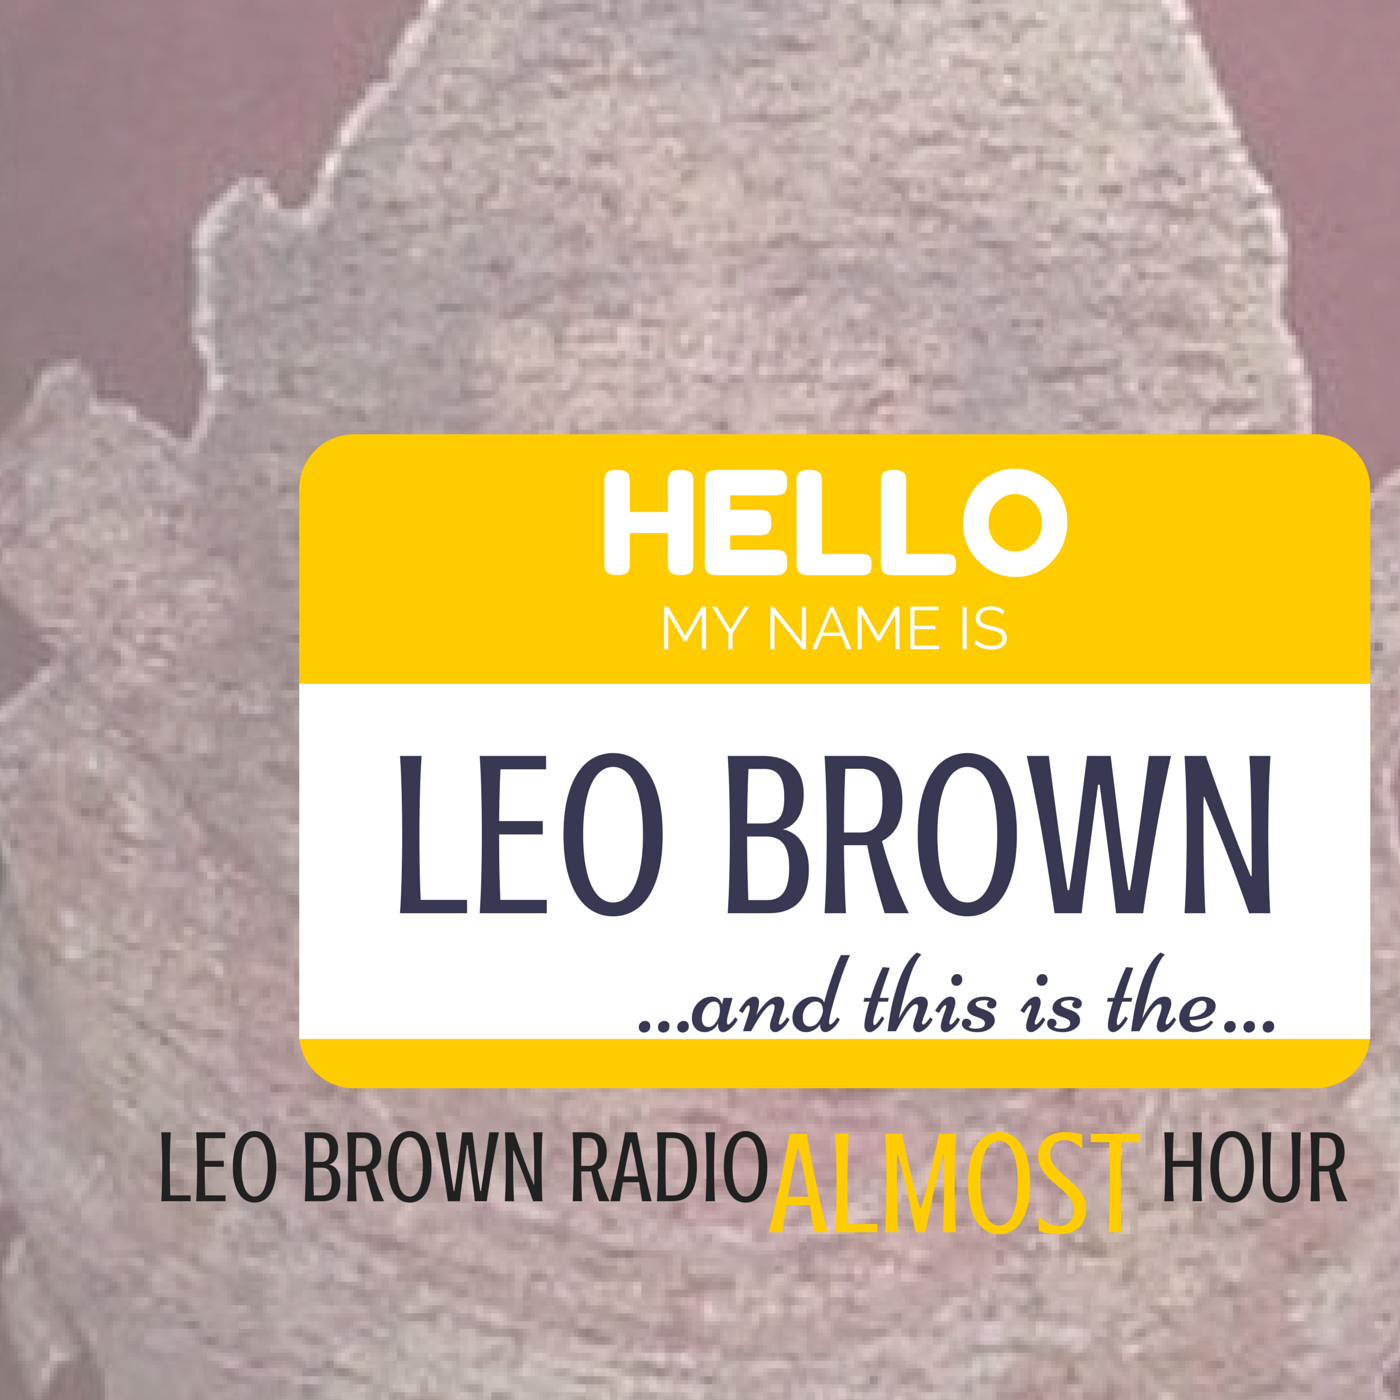 Leo Brown Almost Hour 02/24/17